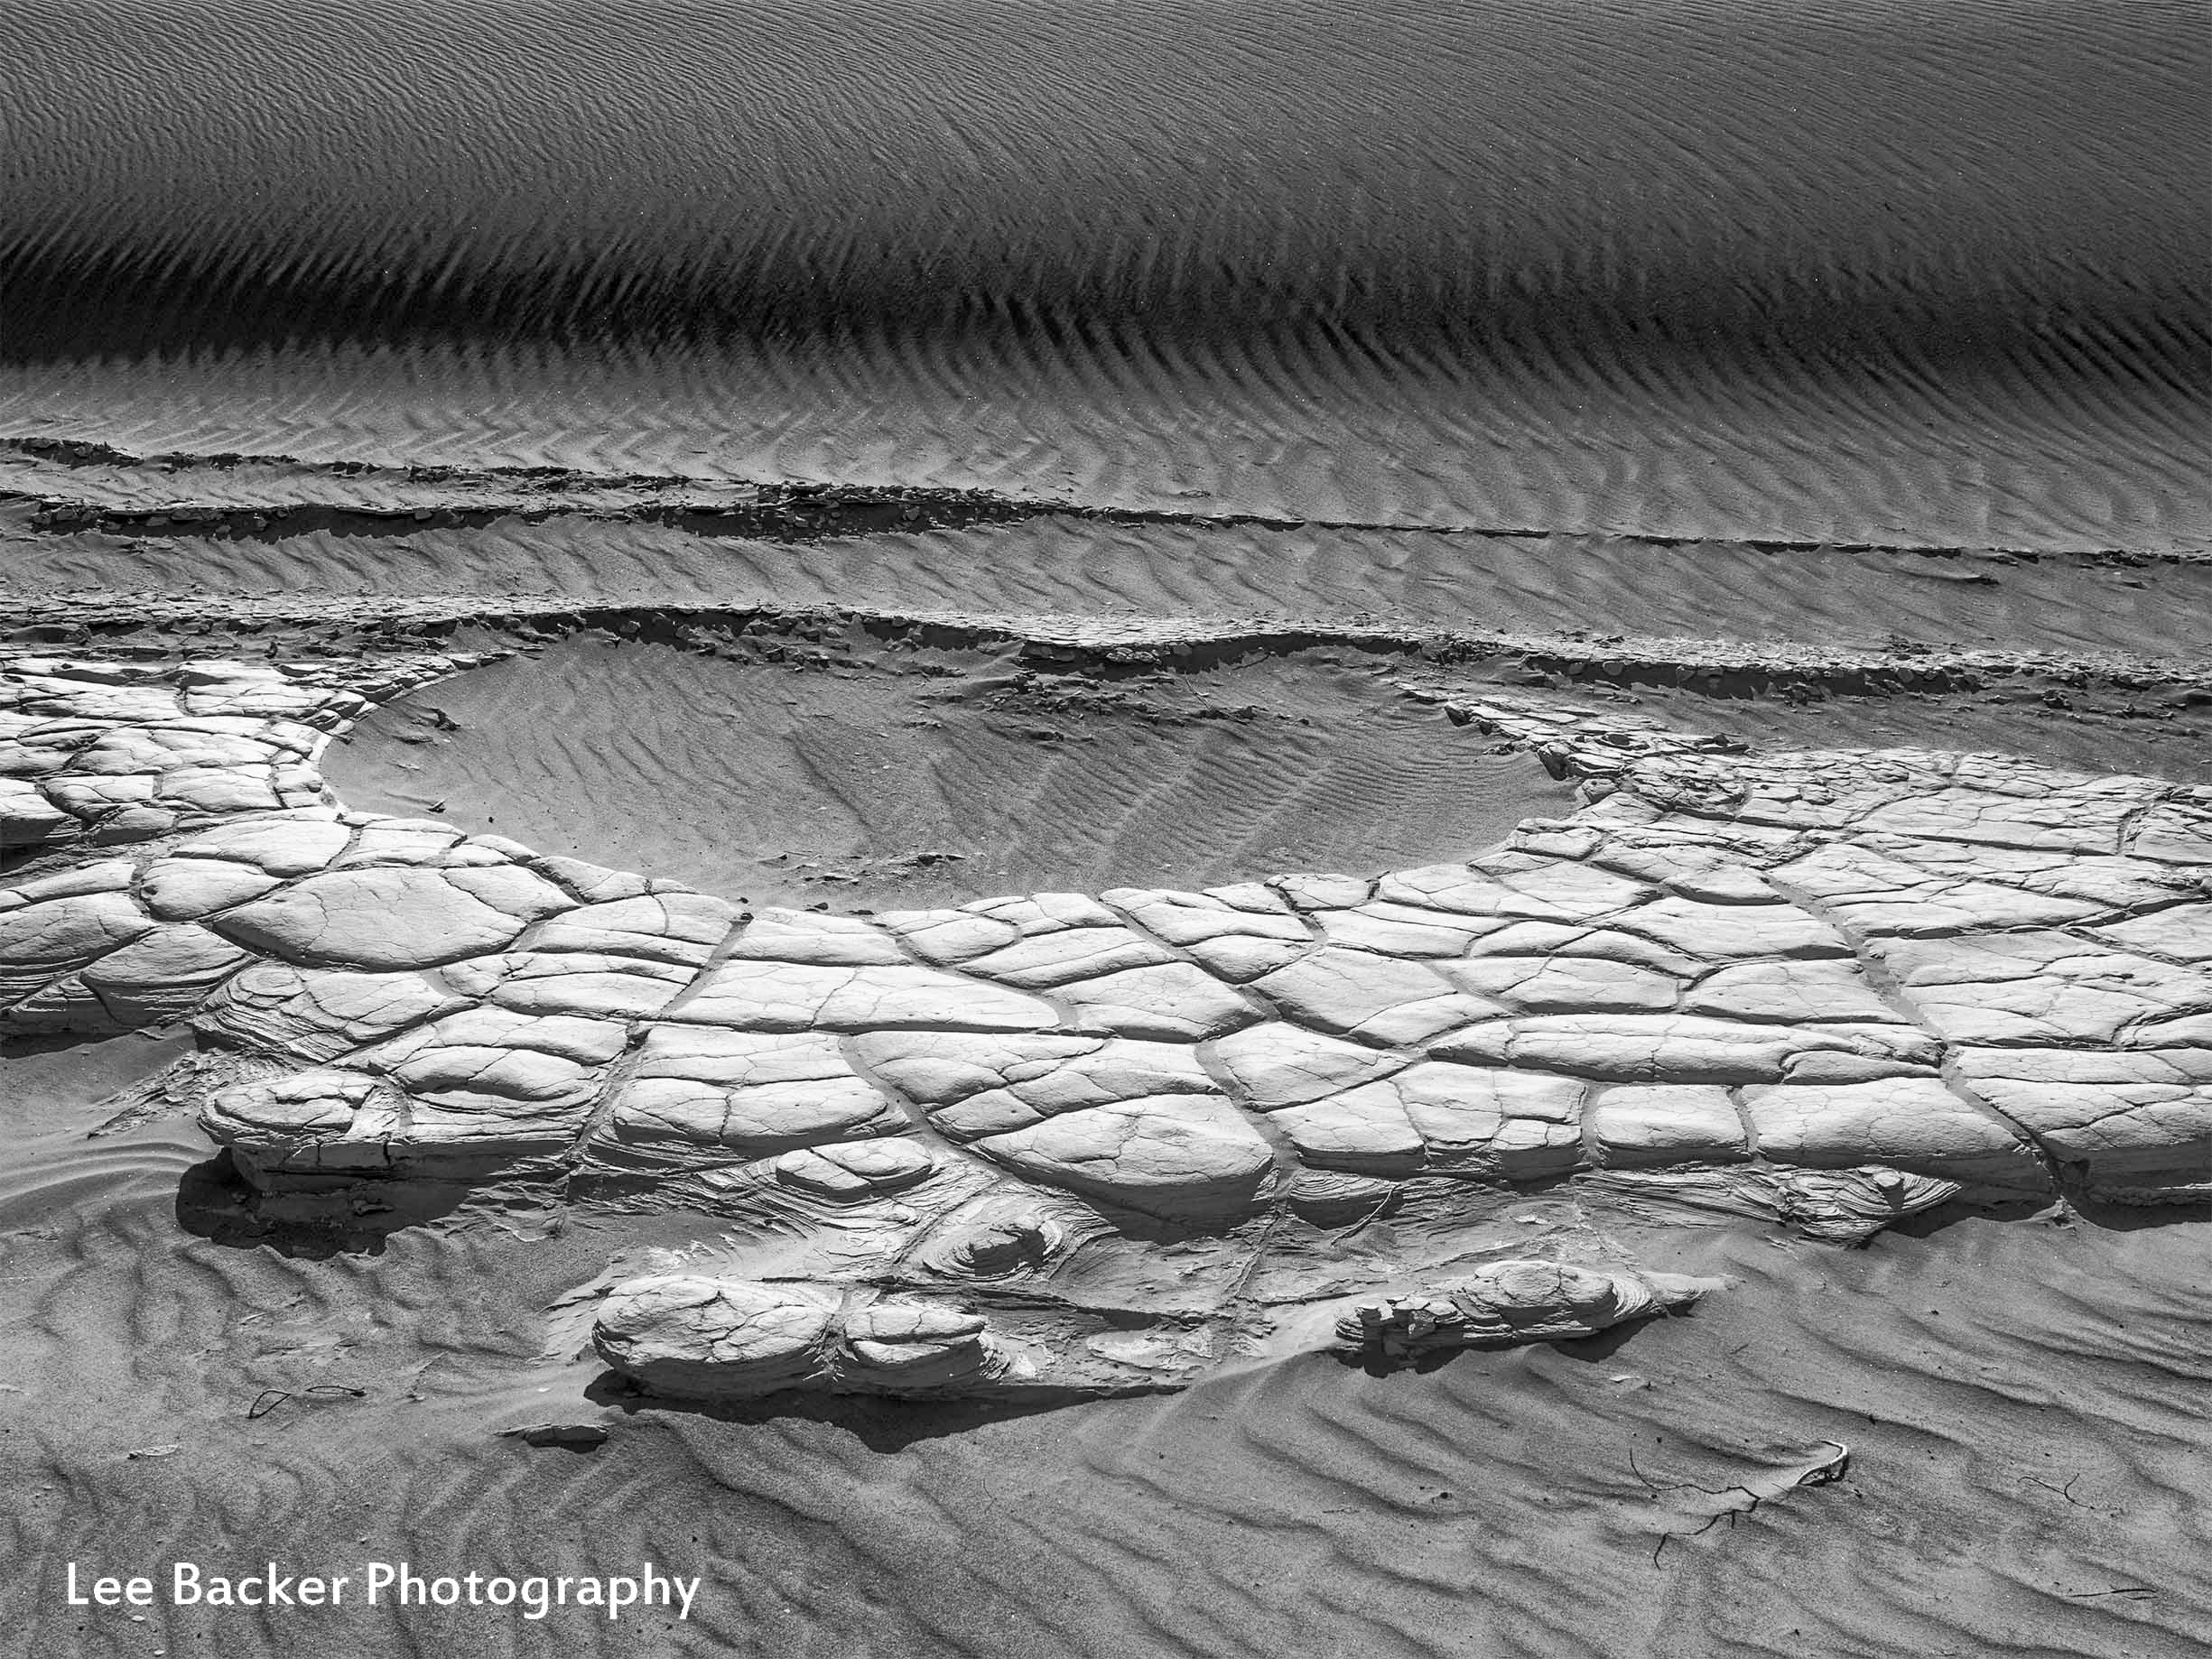 Cracked Mud and Dune, Death Valley